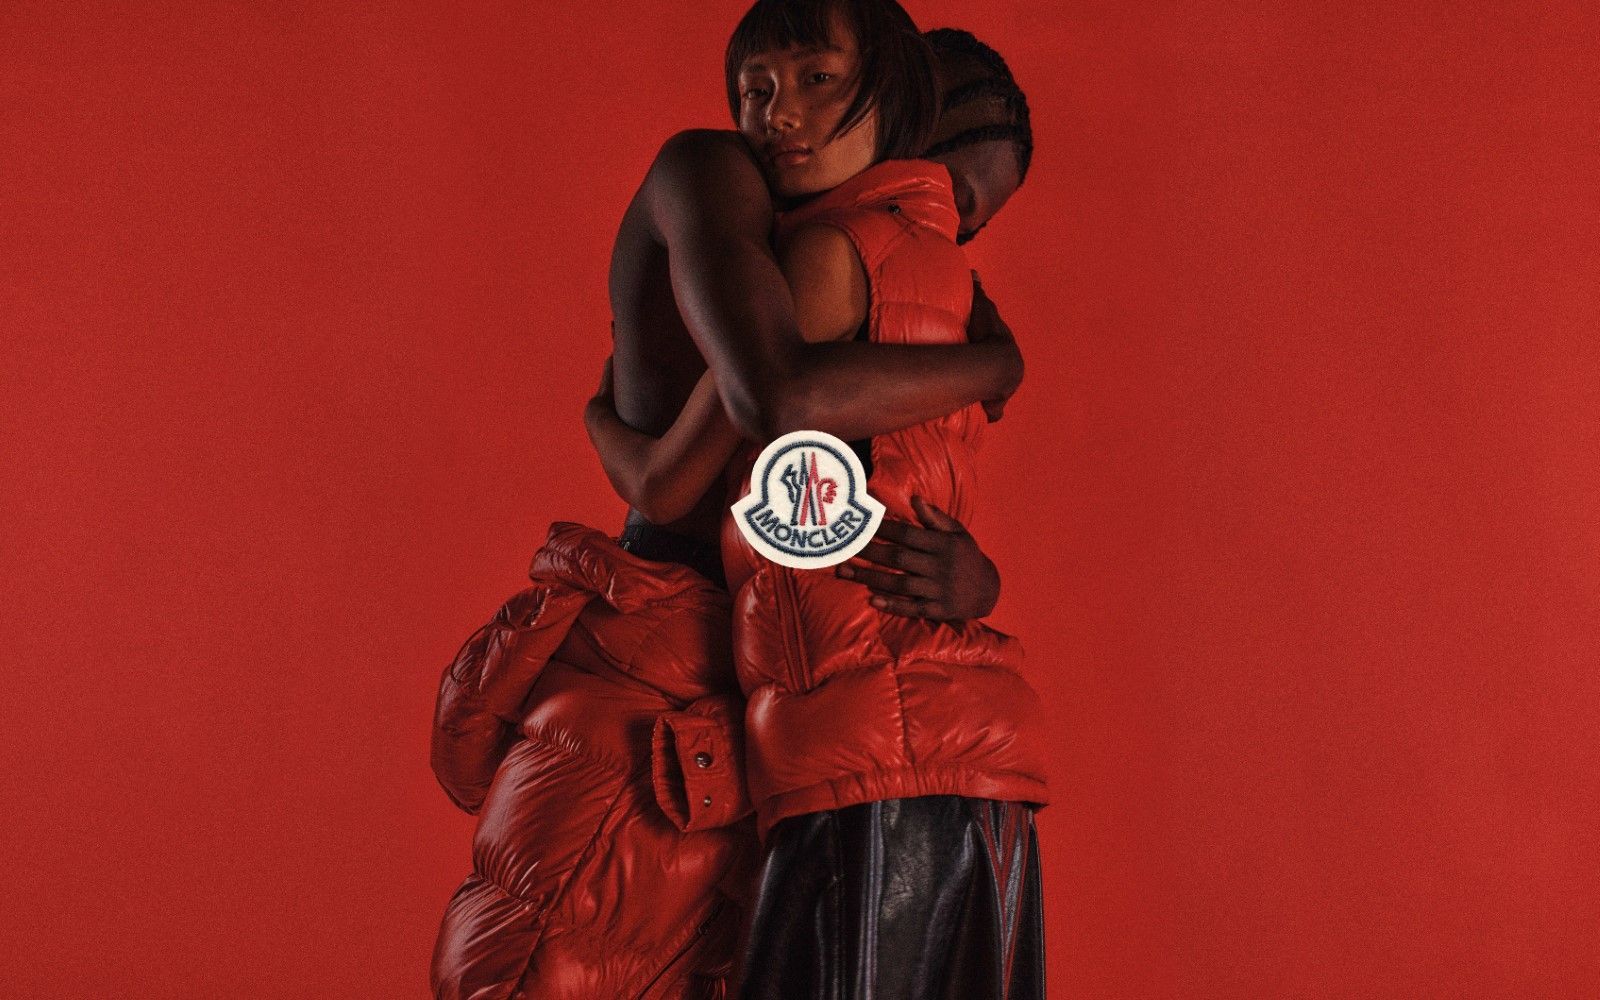 The new We Love Winter campaign by Moncler